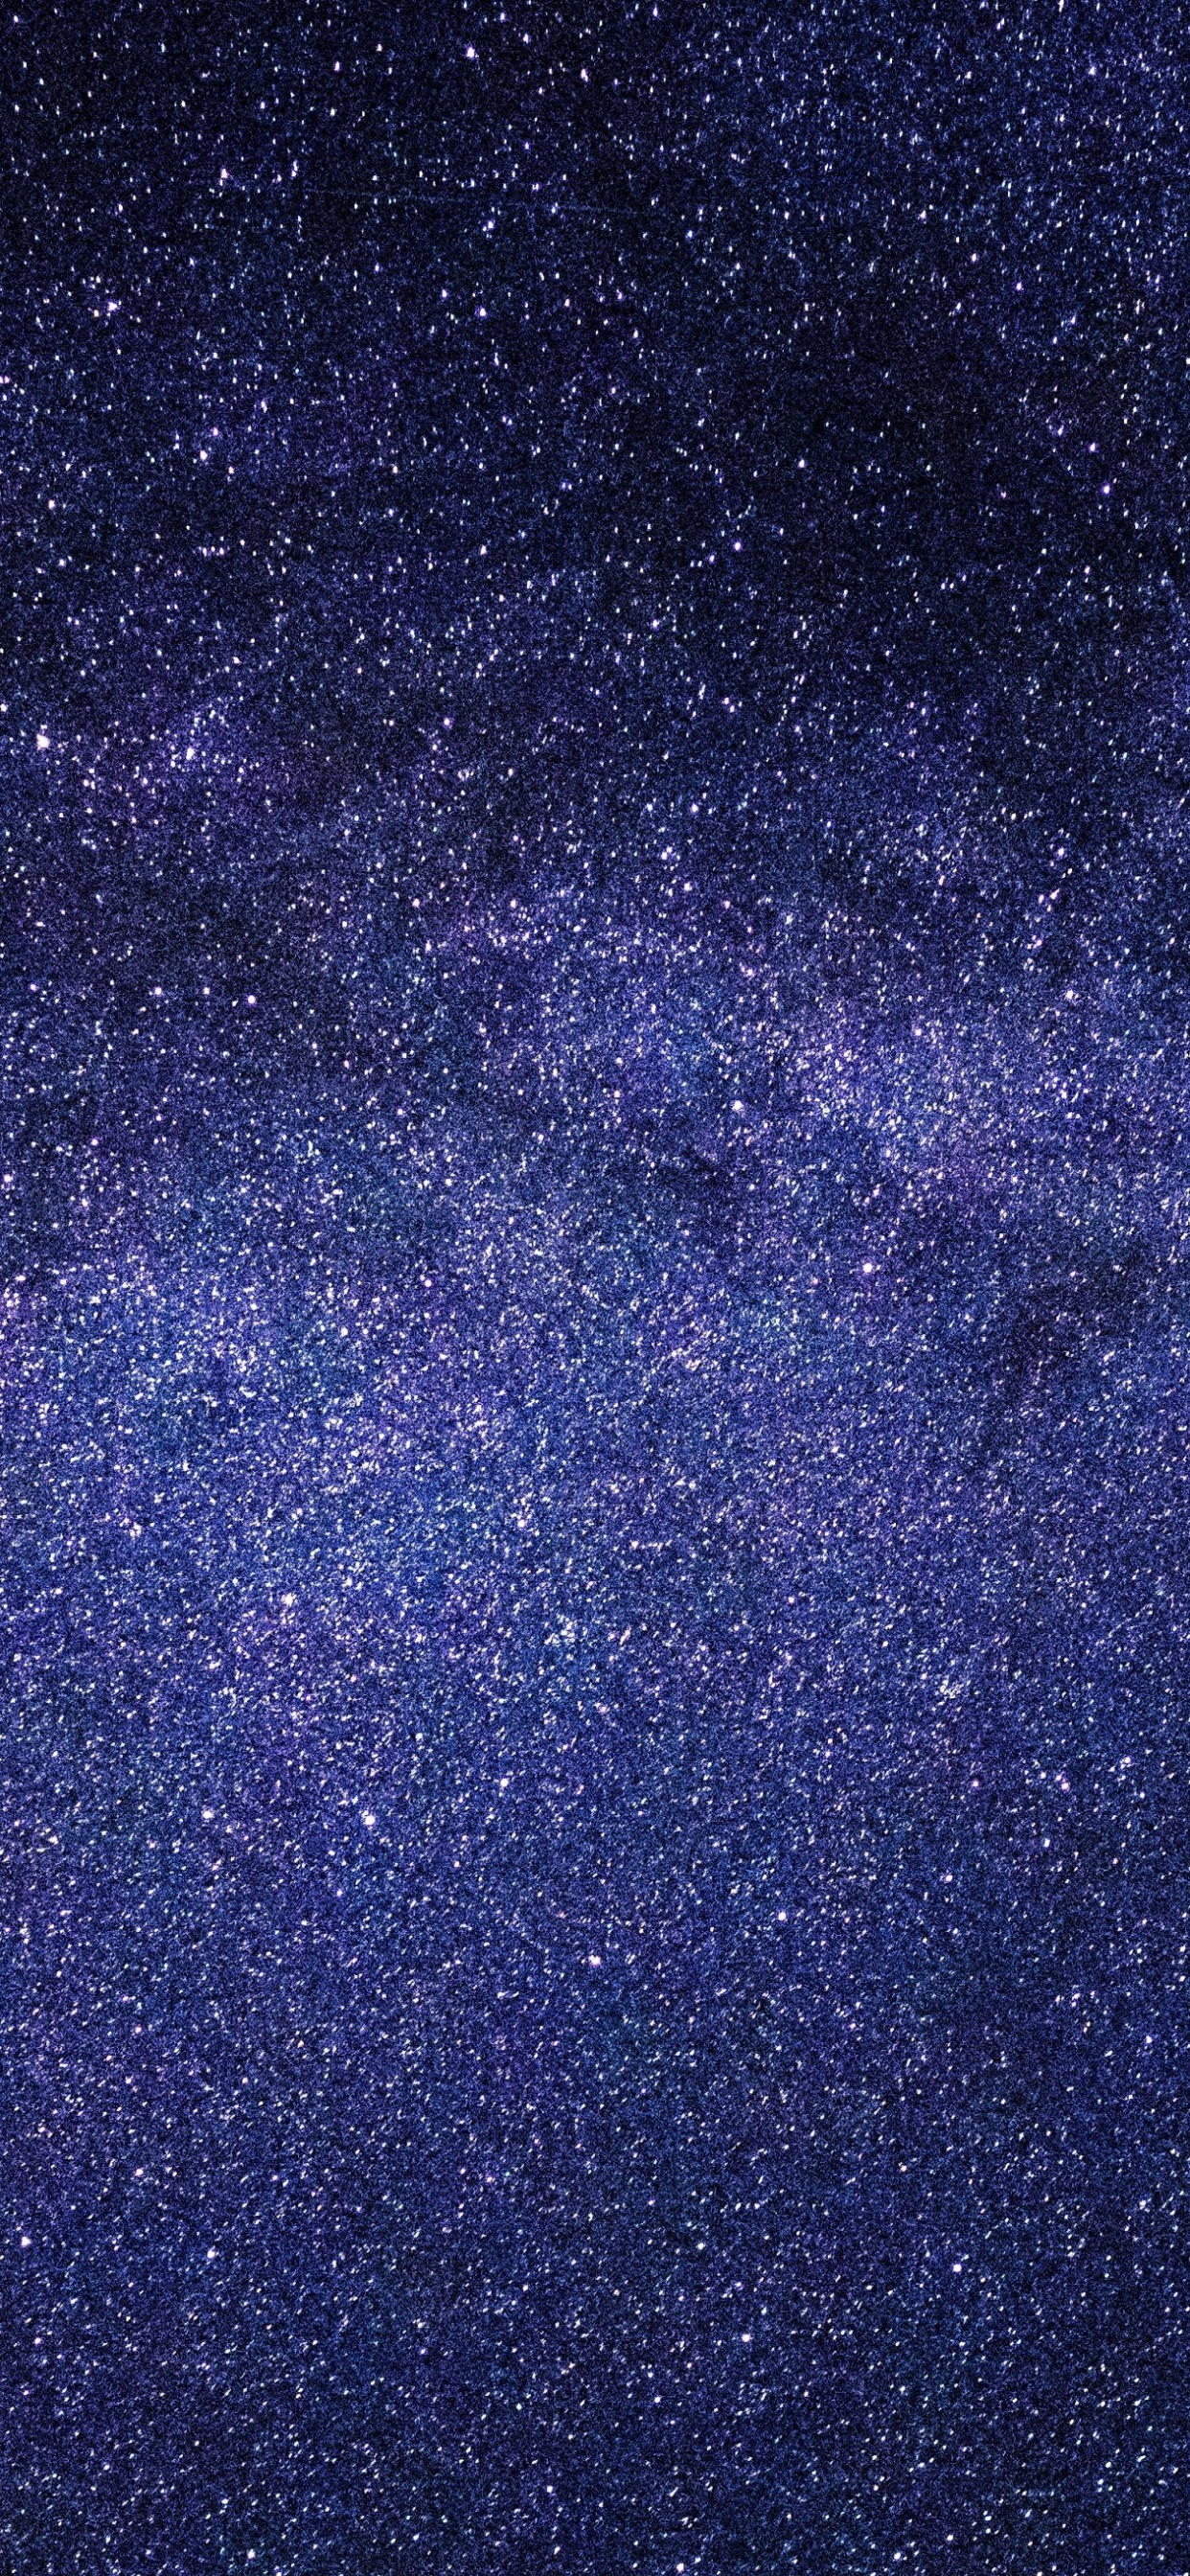 Blue and Black Starry Night. Wallpaper in 1242x2688 Resolution